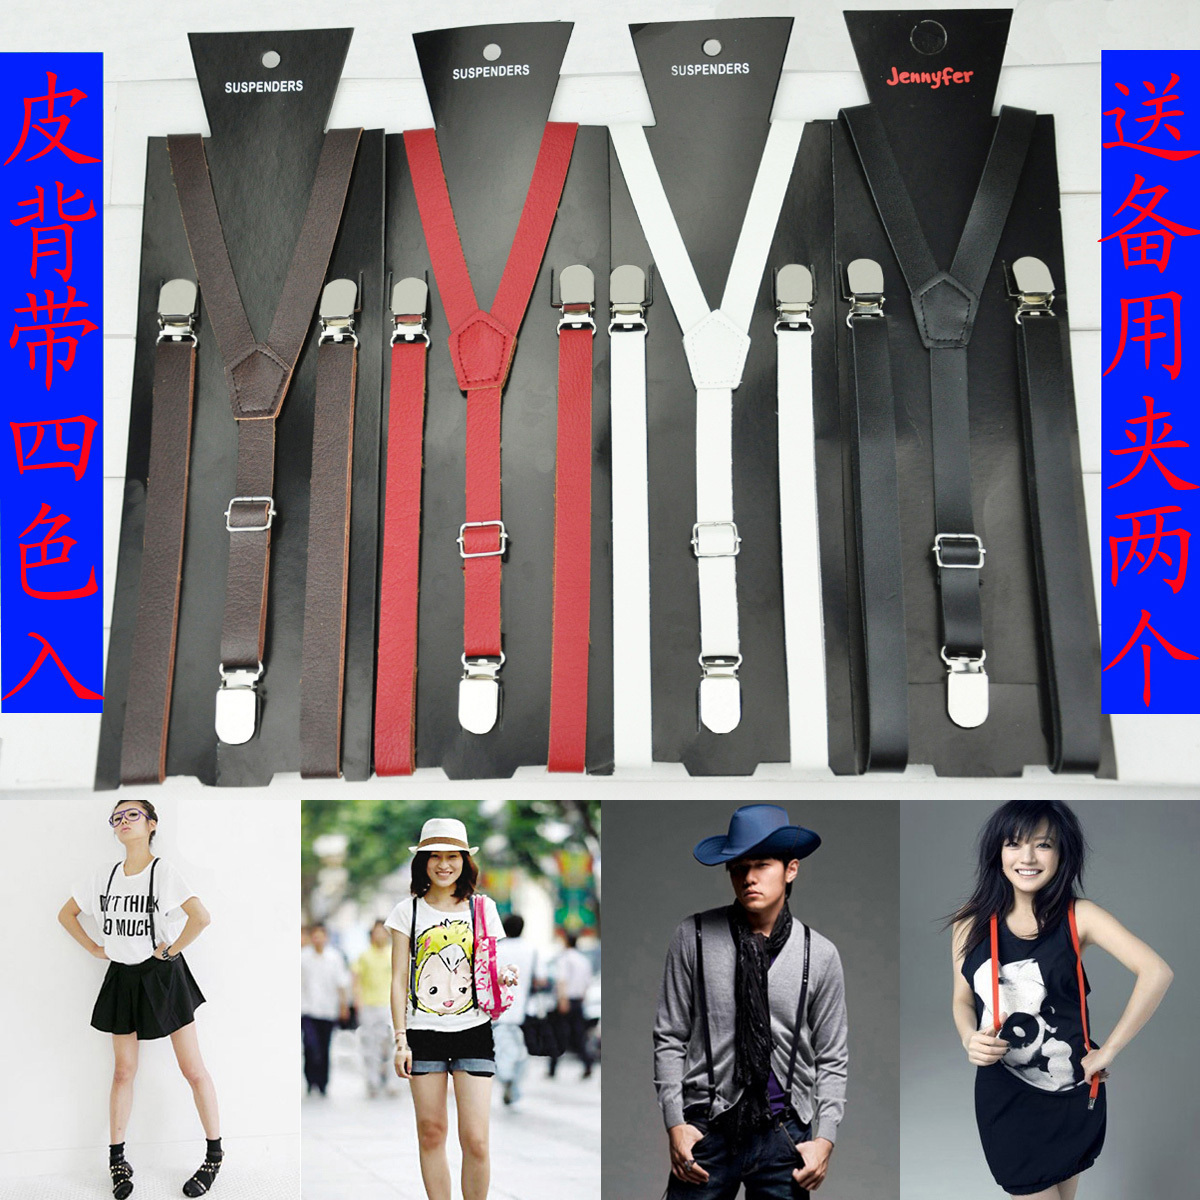 Free shipping 1.5 leather suspenders male suspenders clip women's suspenders clip elastic photography props